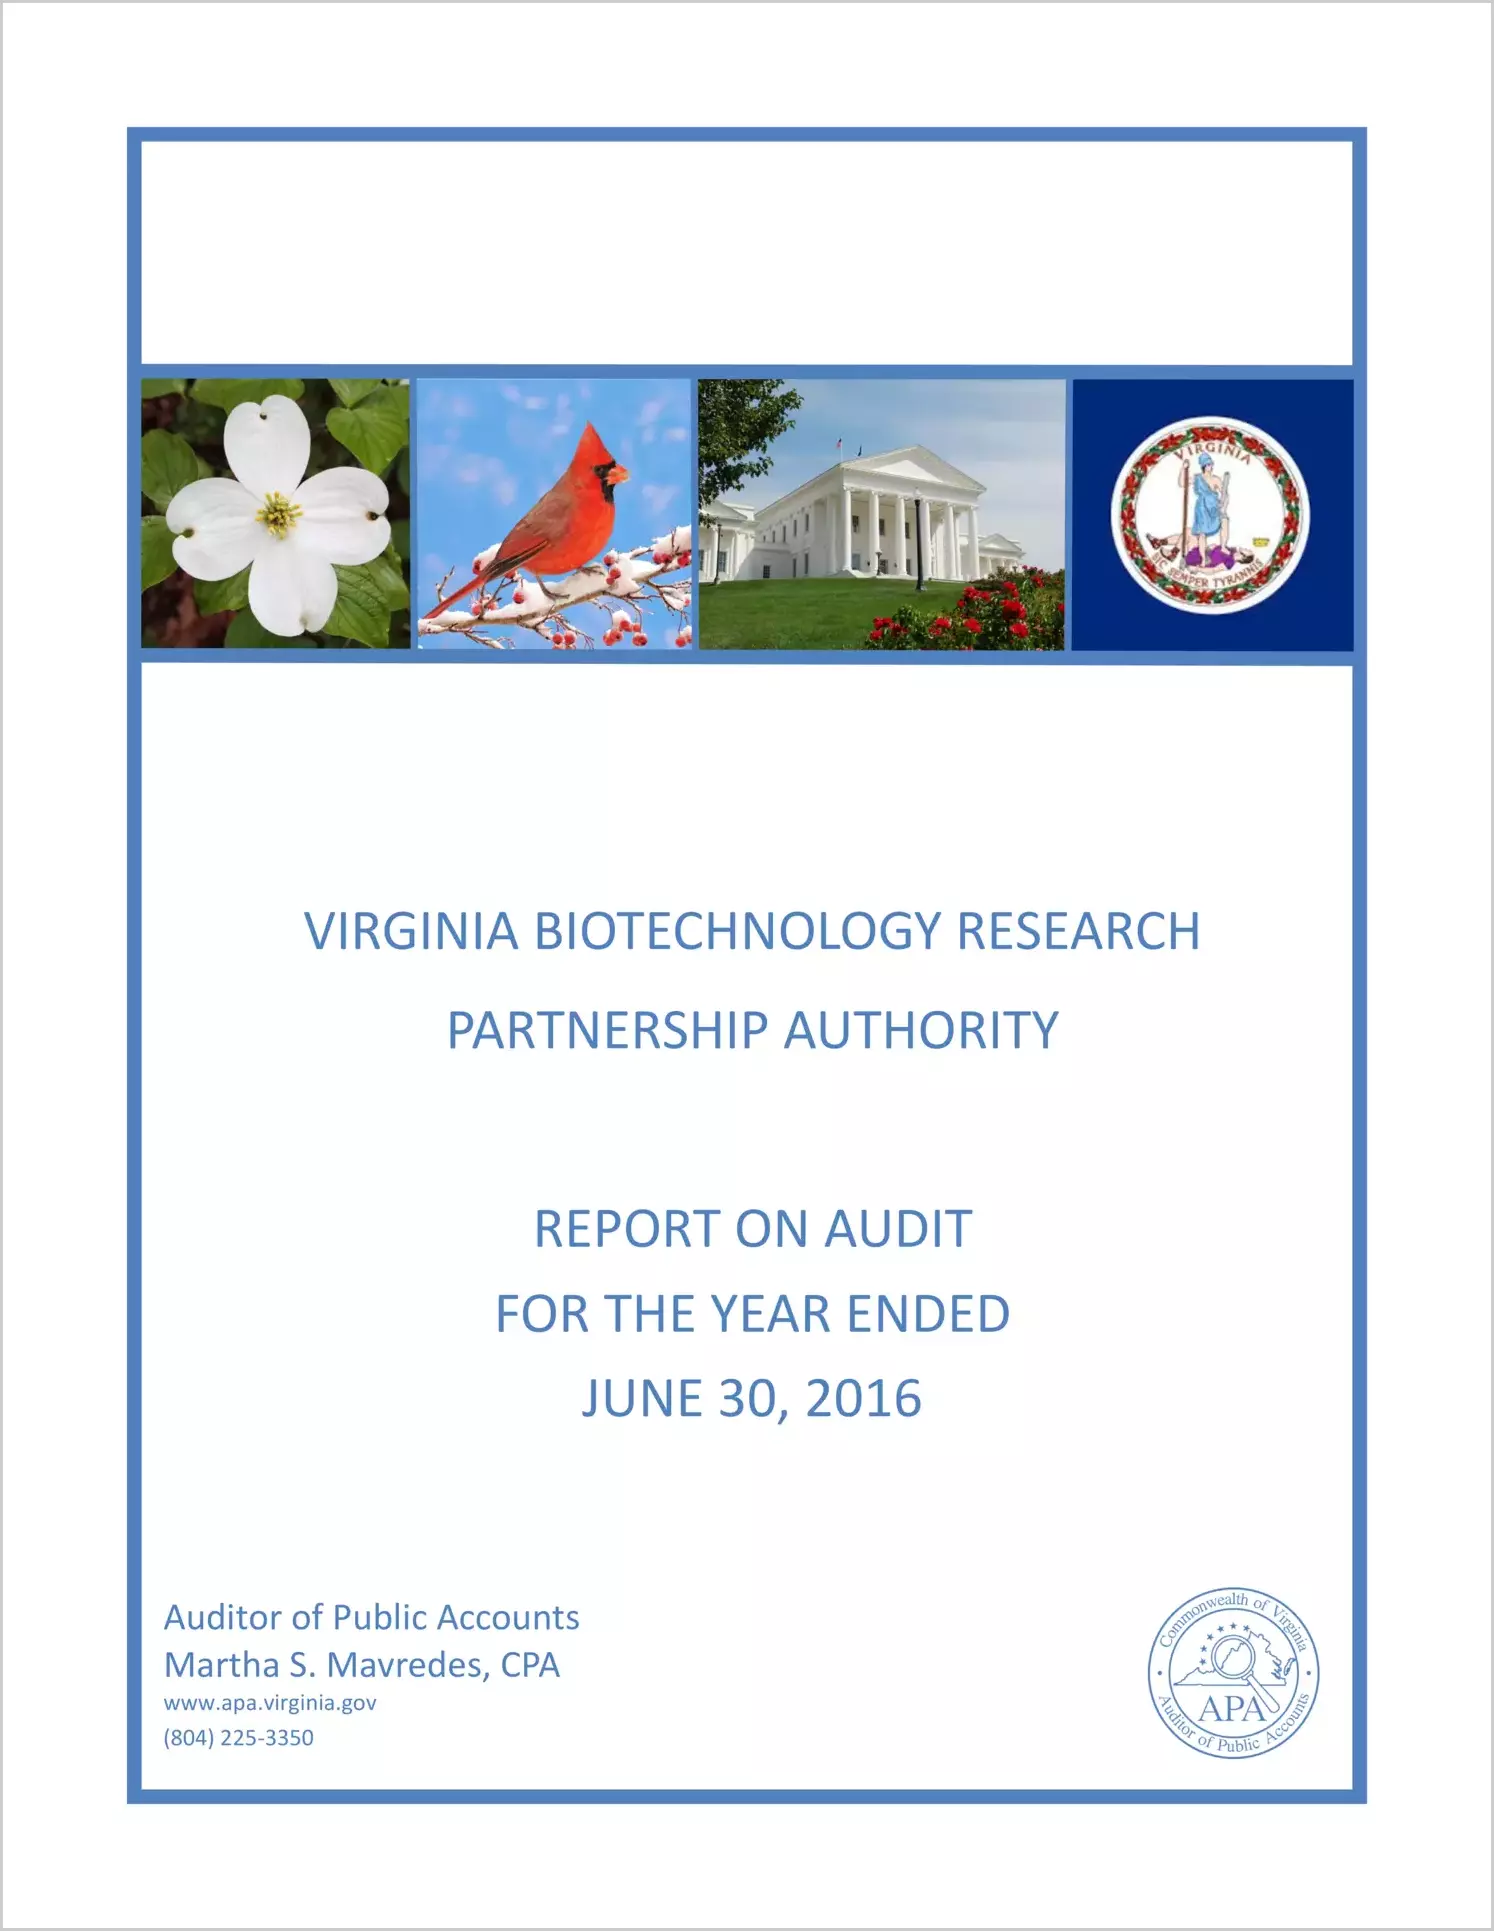 Virginia Biotechnology Research Partnership Authority for the year ended June 30, 2016